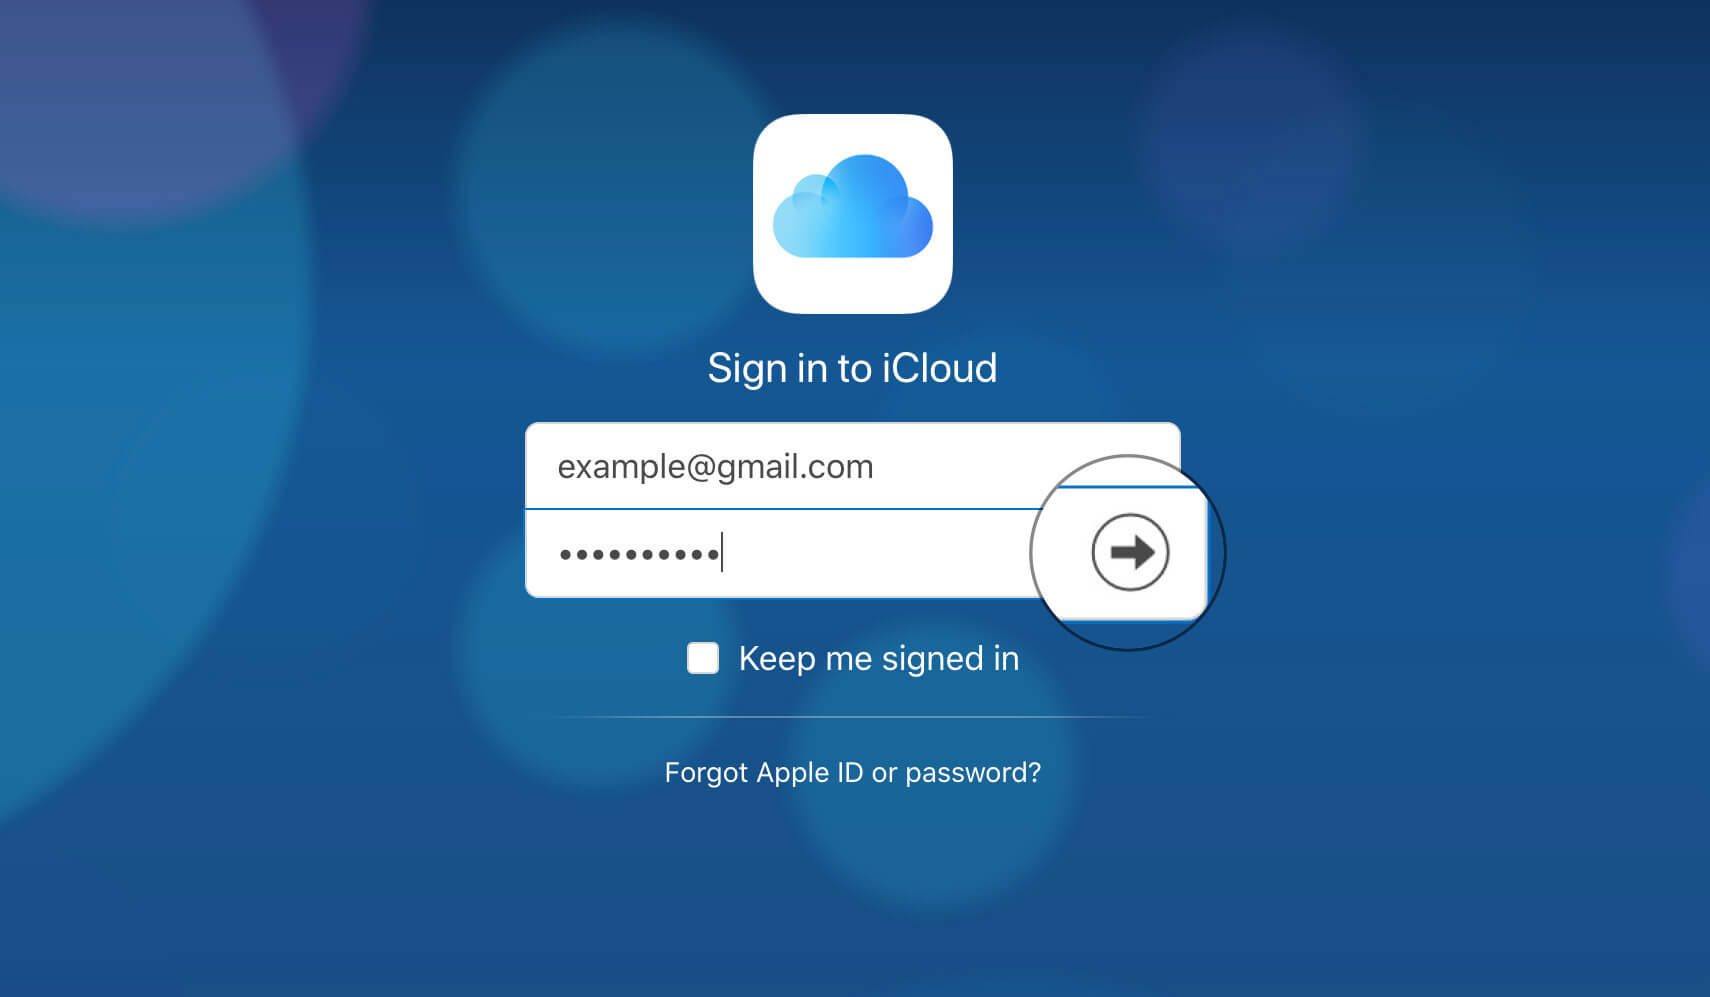 Sign in to iCloud Using Apple ID